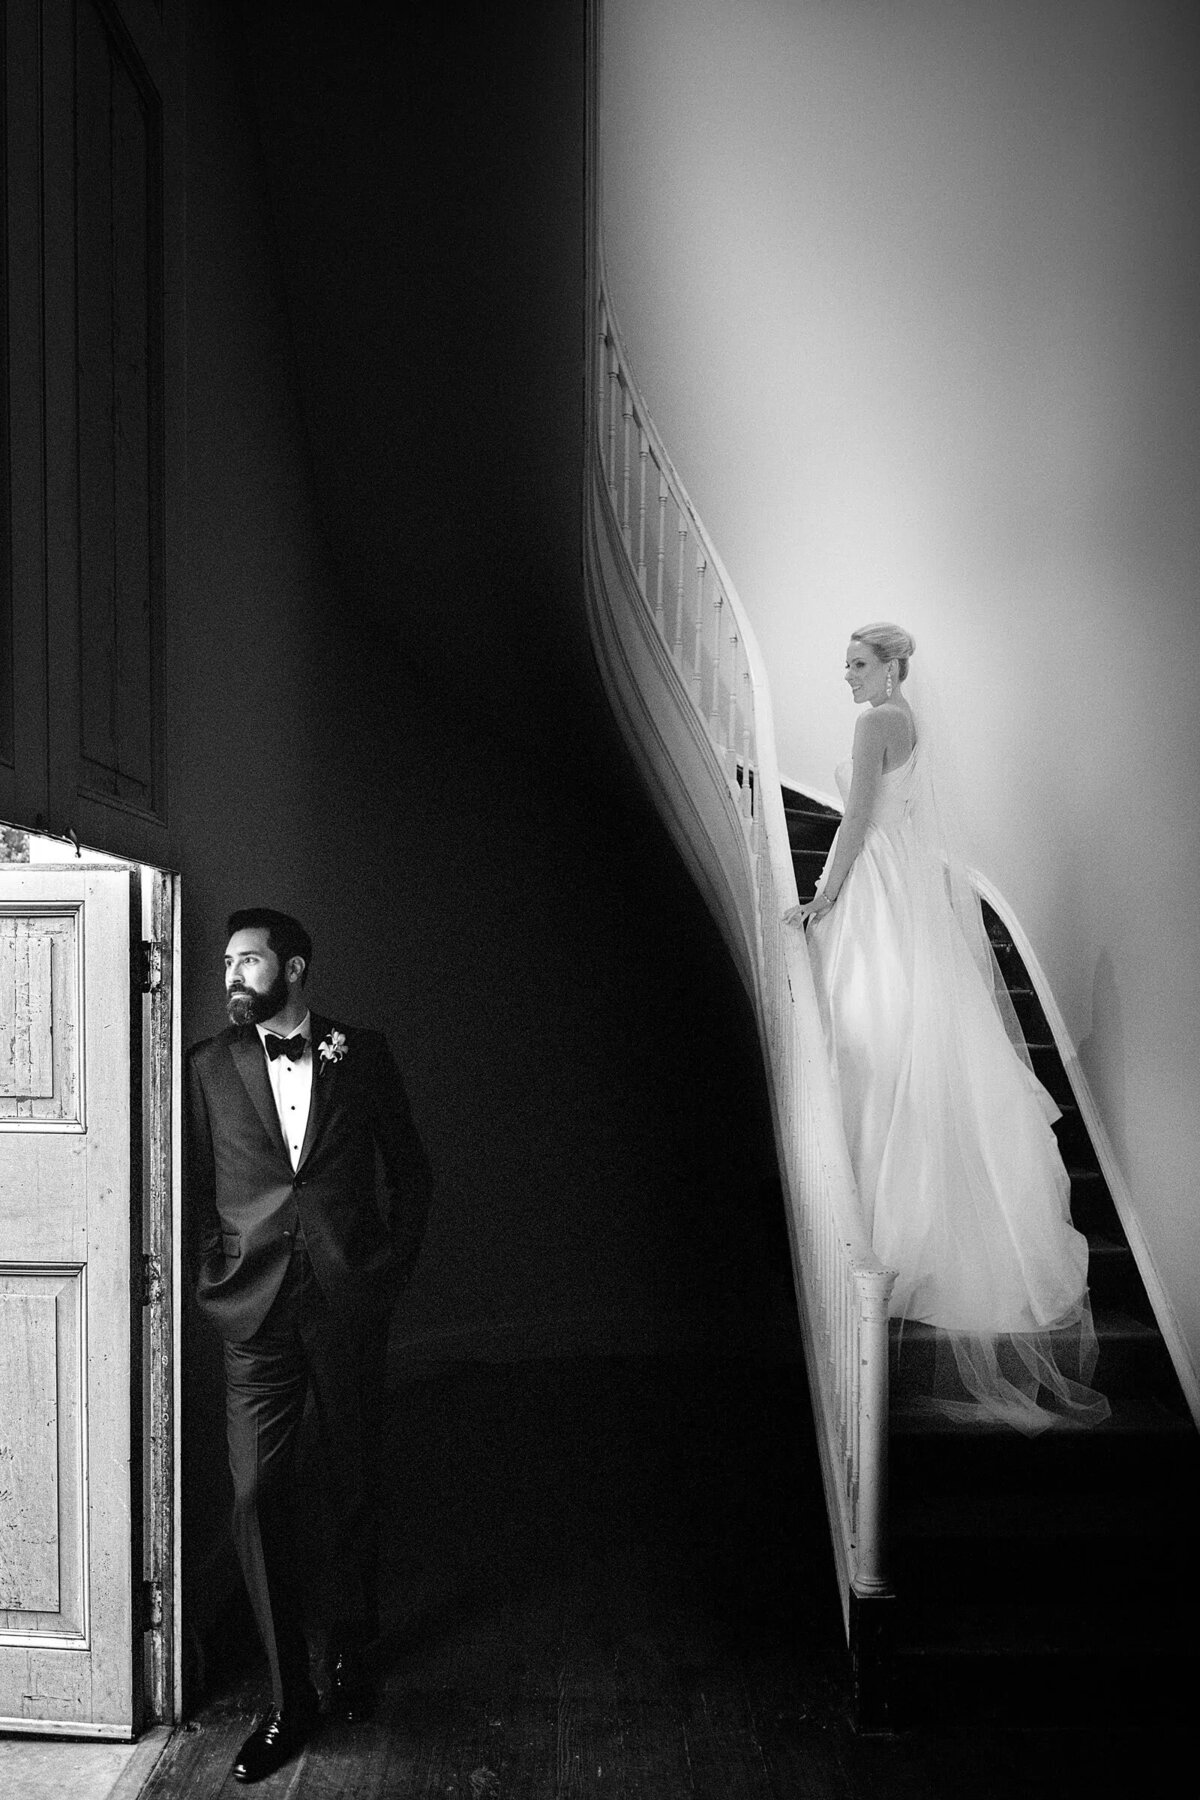 A dramatic black and white photo of a bride ascending a staircase while the groom waits below